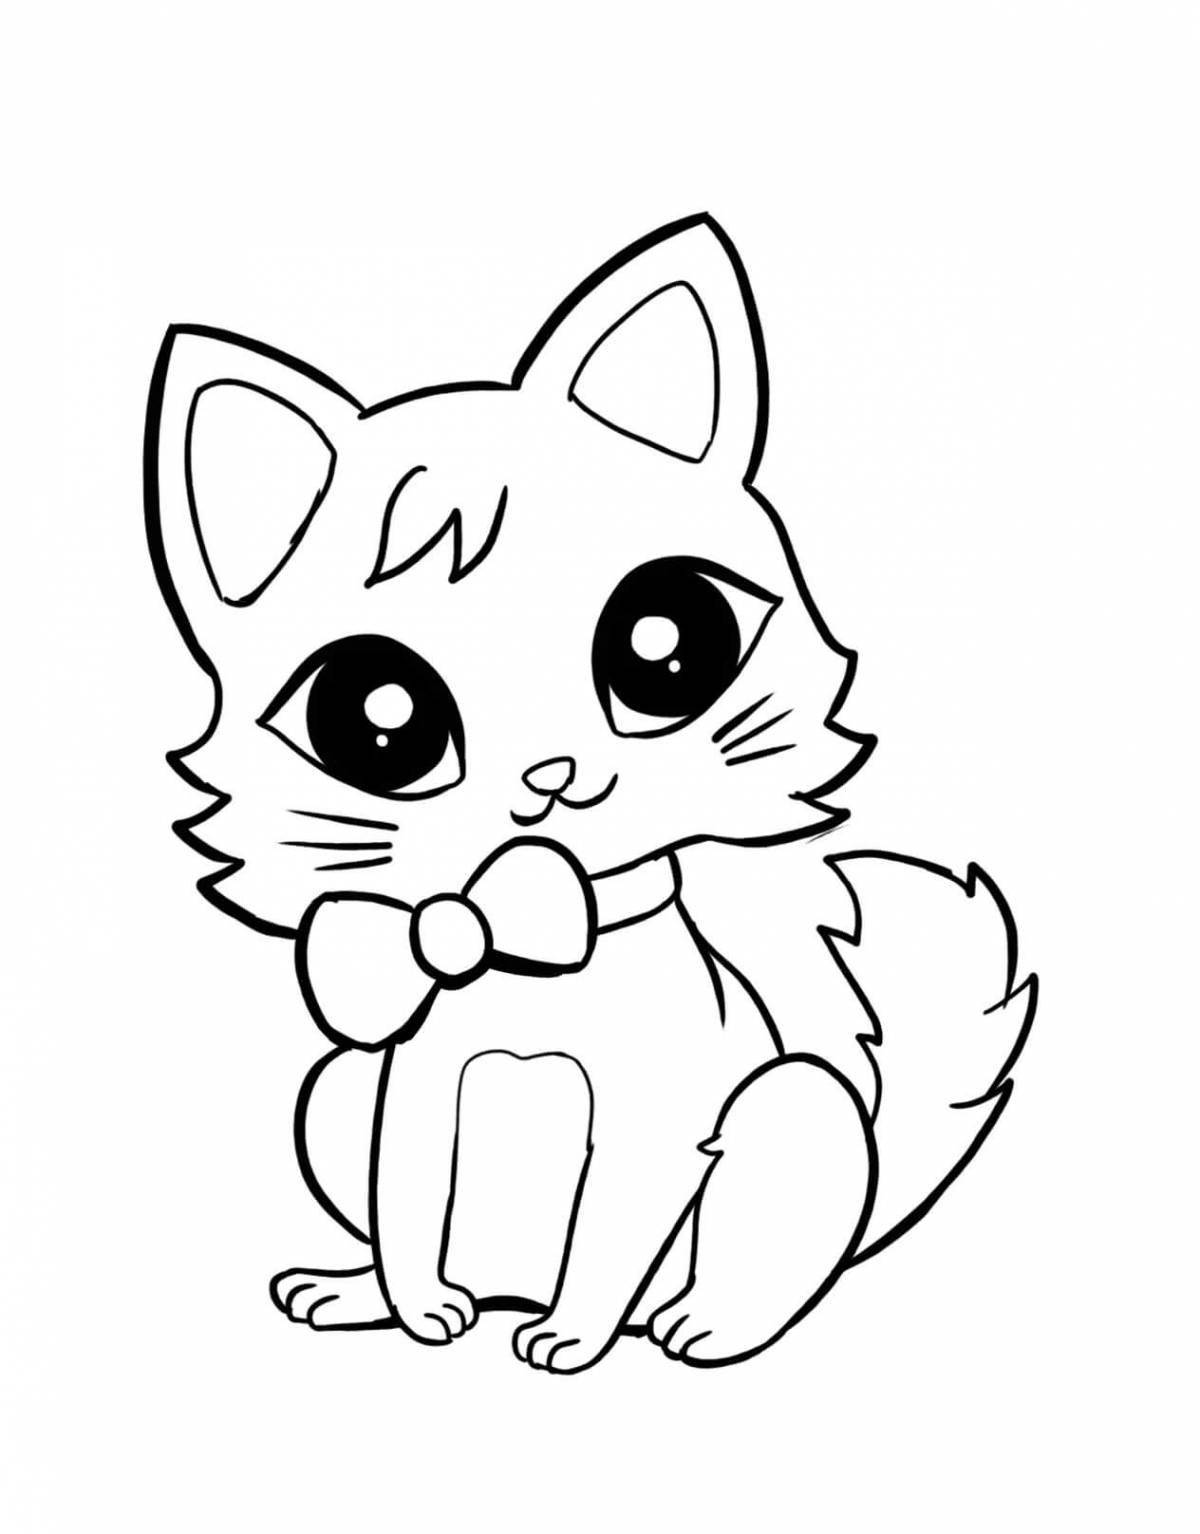 Coloring soft kitten with a bow